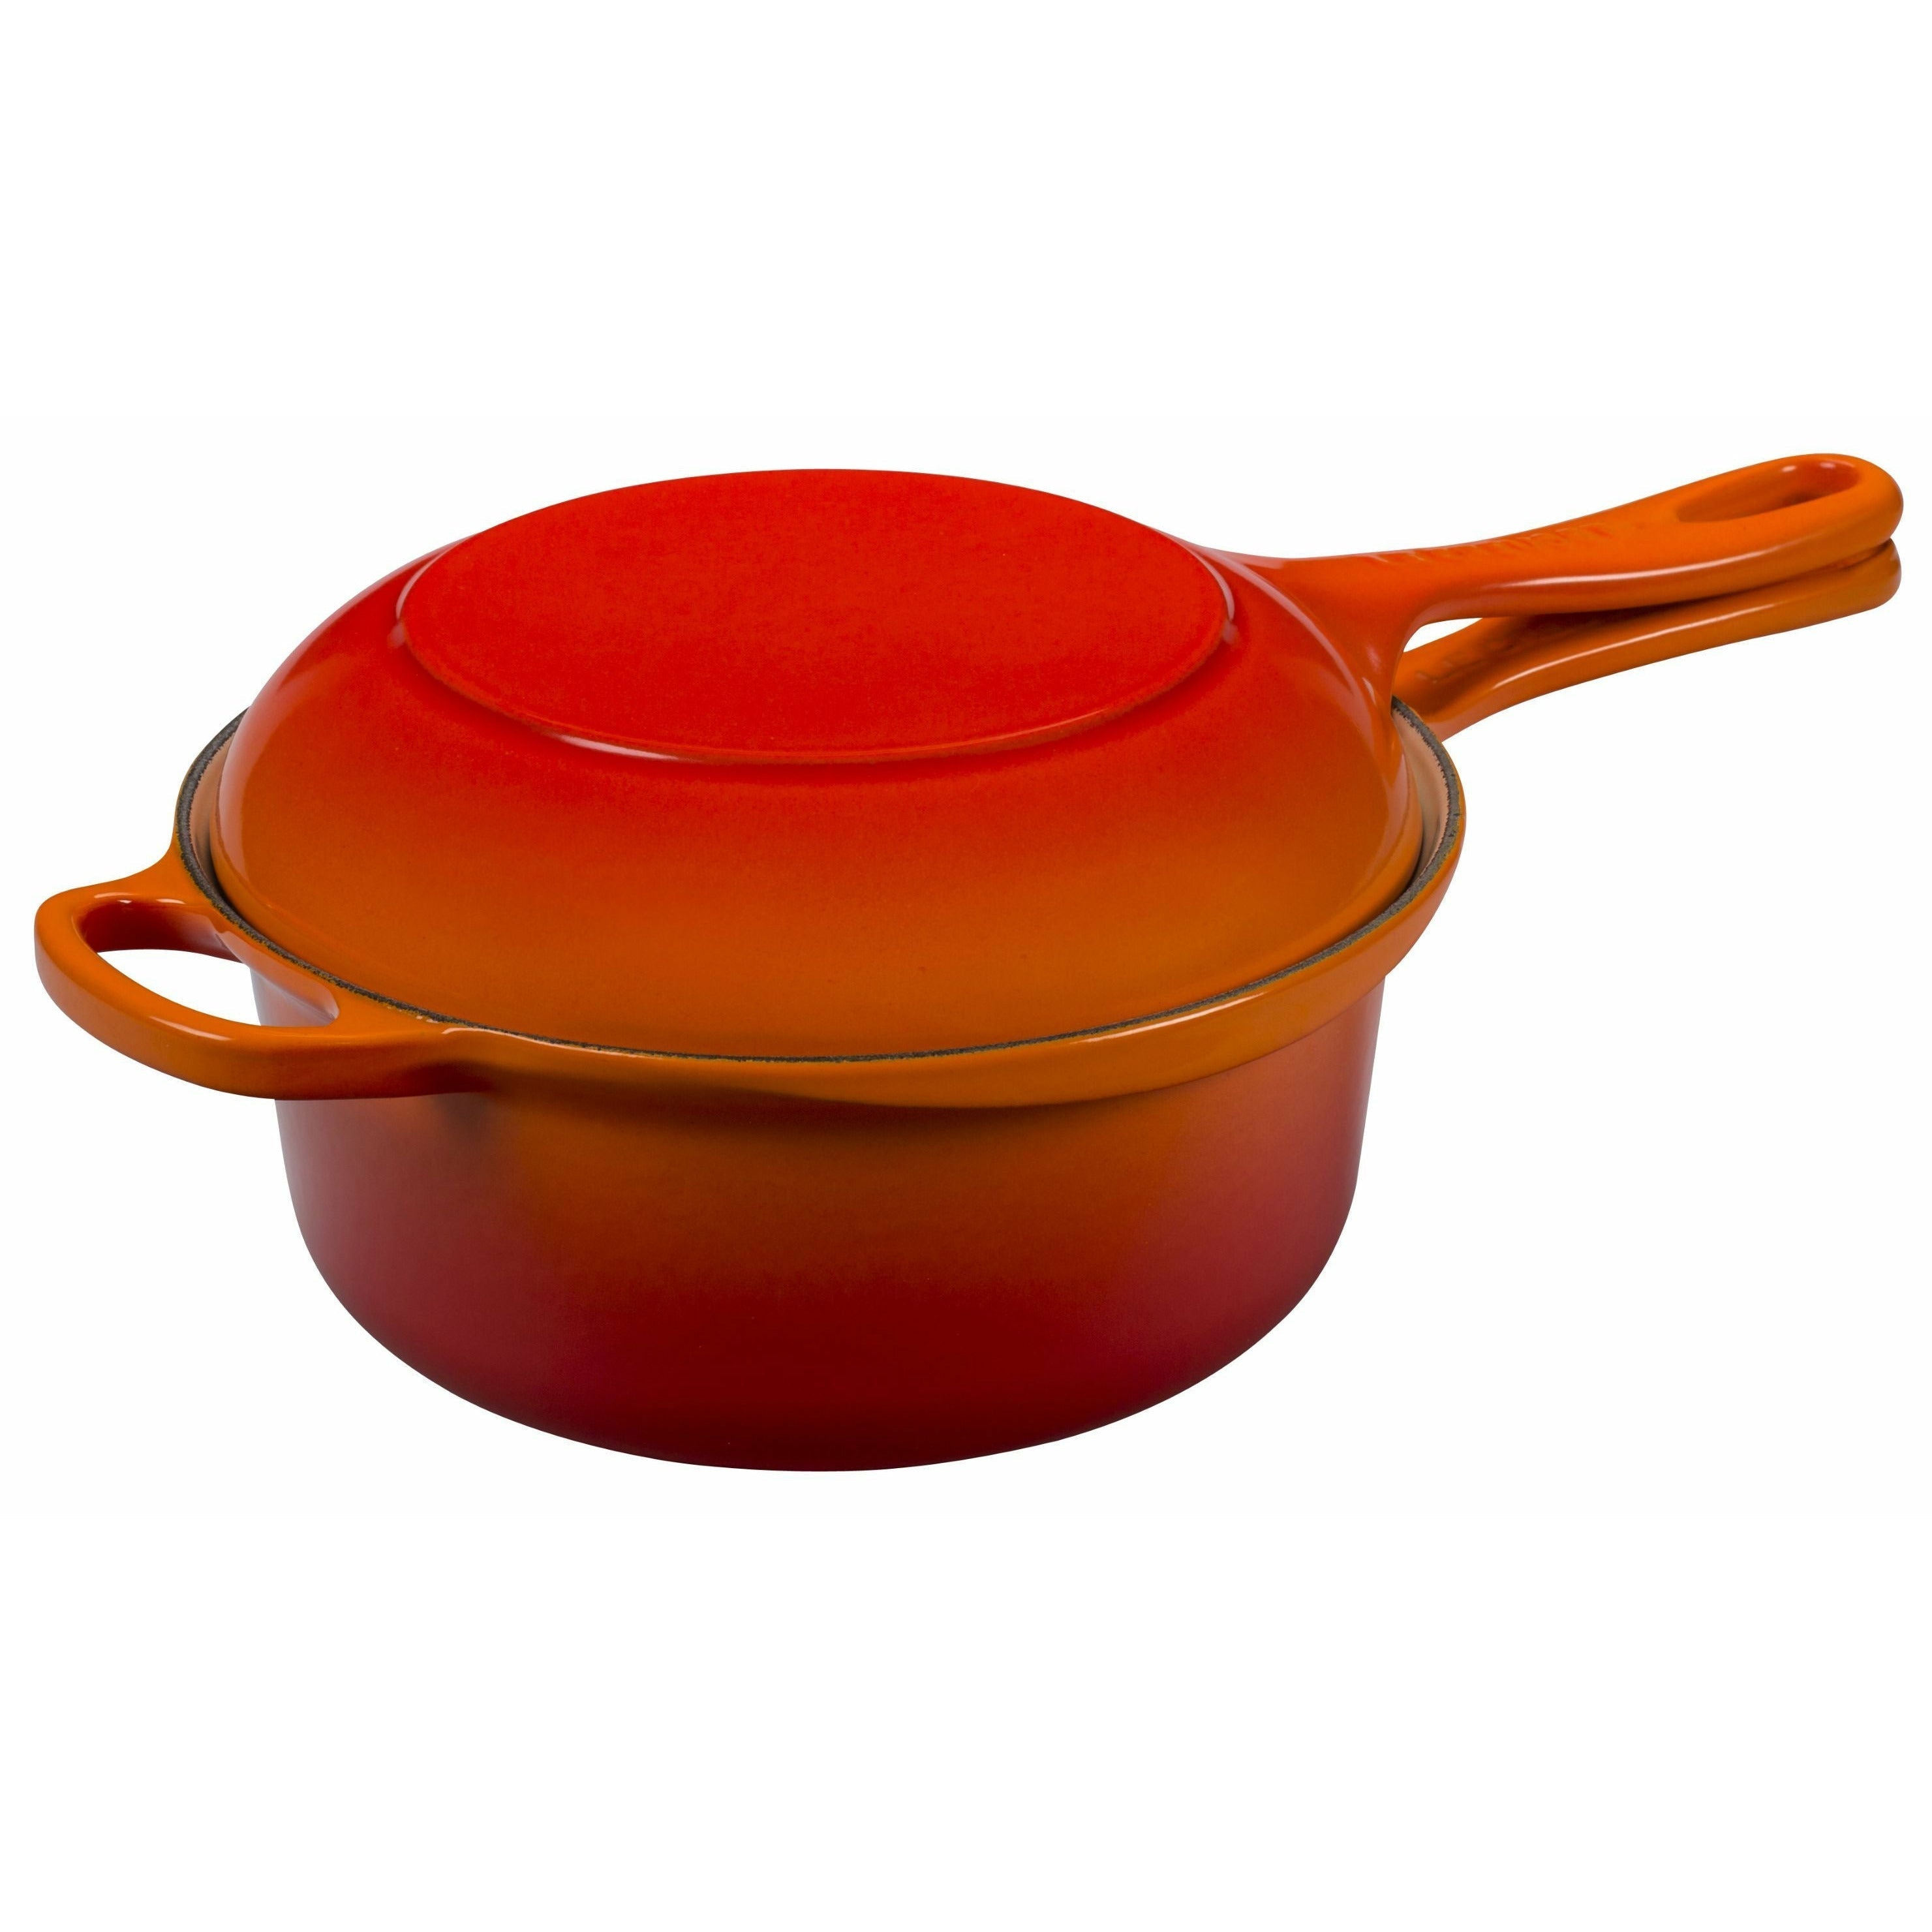 Le Creuset Tradition 2 In 1 Marmitout 22 Cm, Oven Red